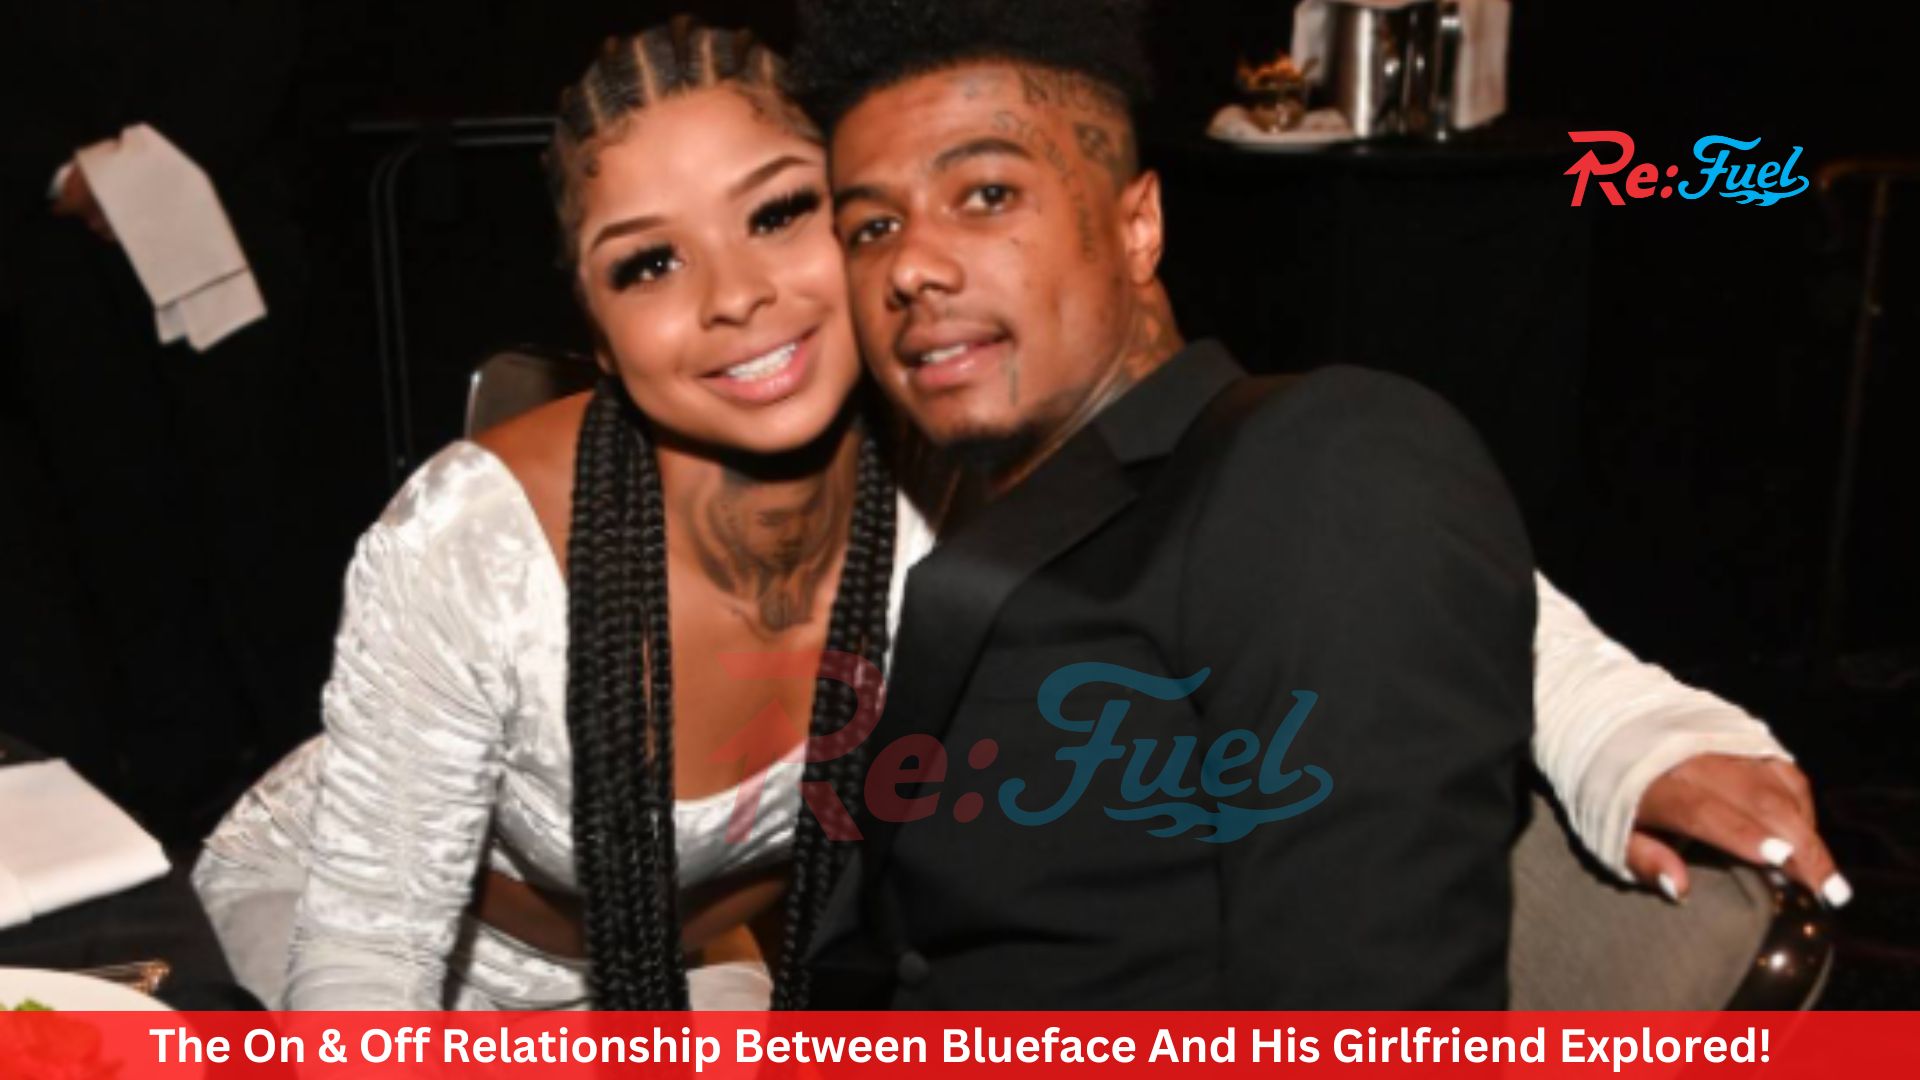 The On & Off Relationship Between Blueface And His Girlfriend Explored!